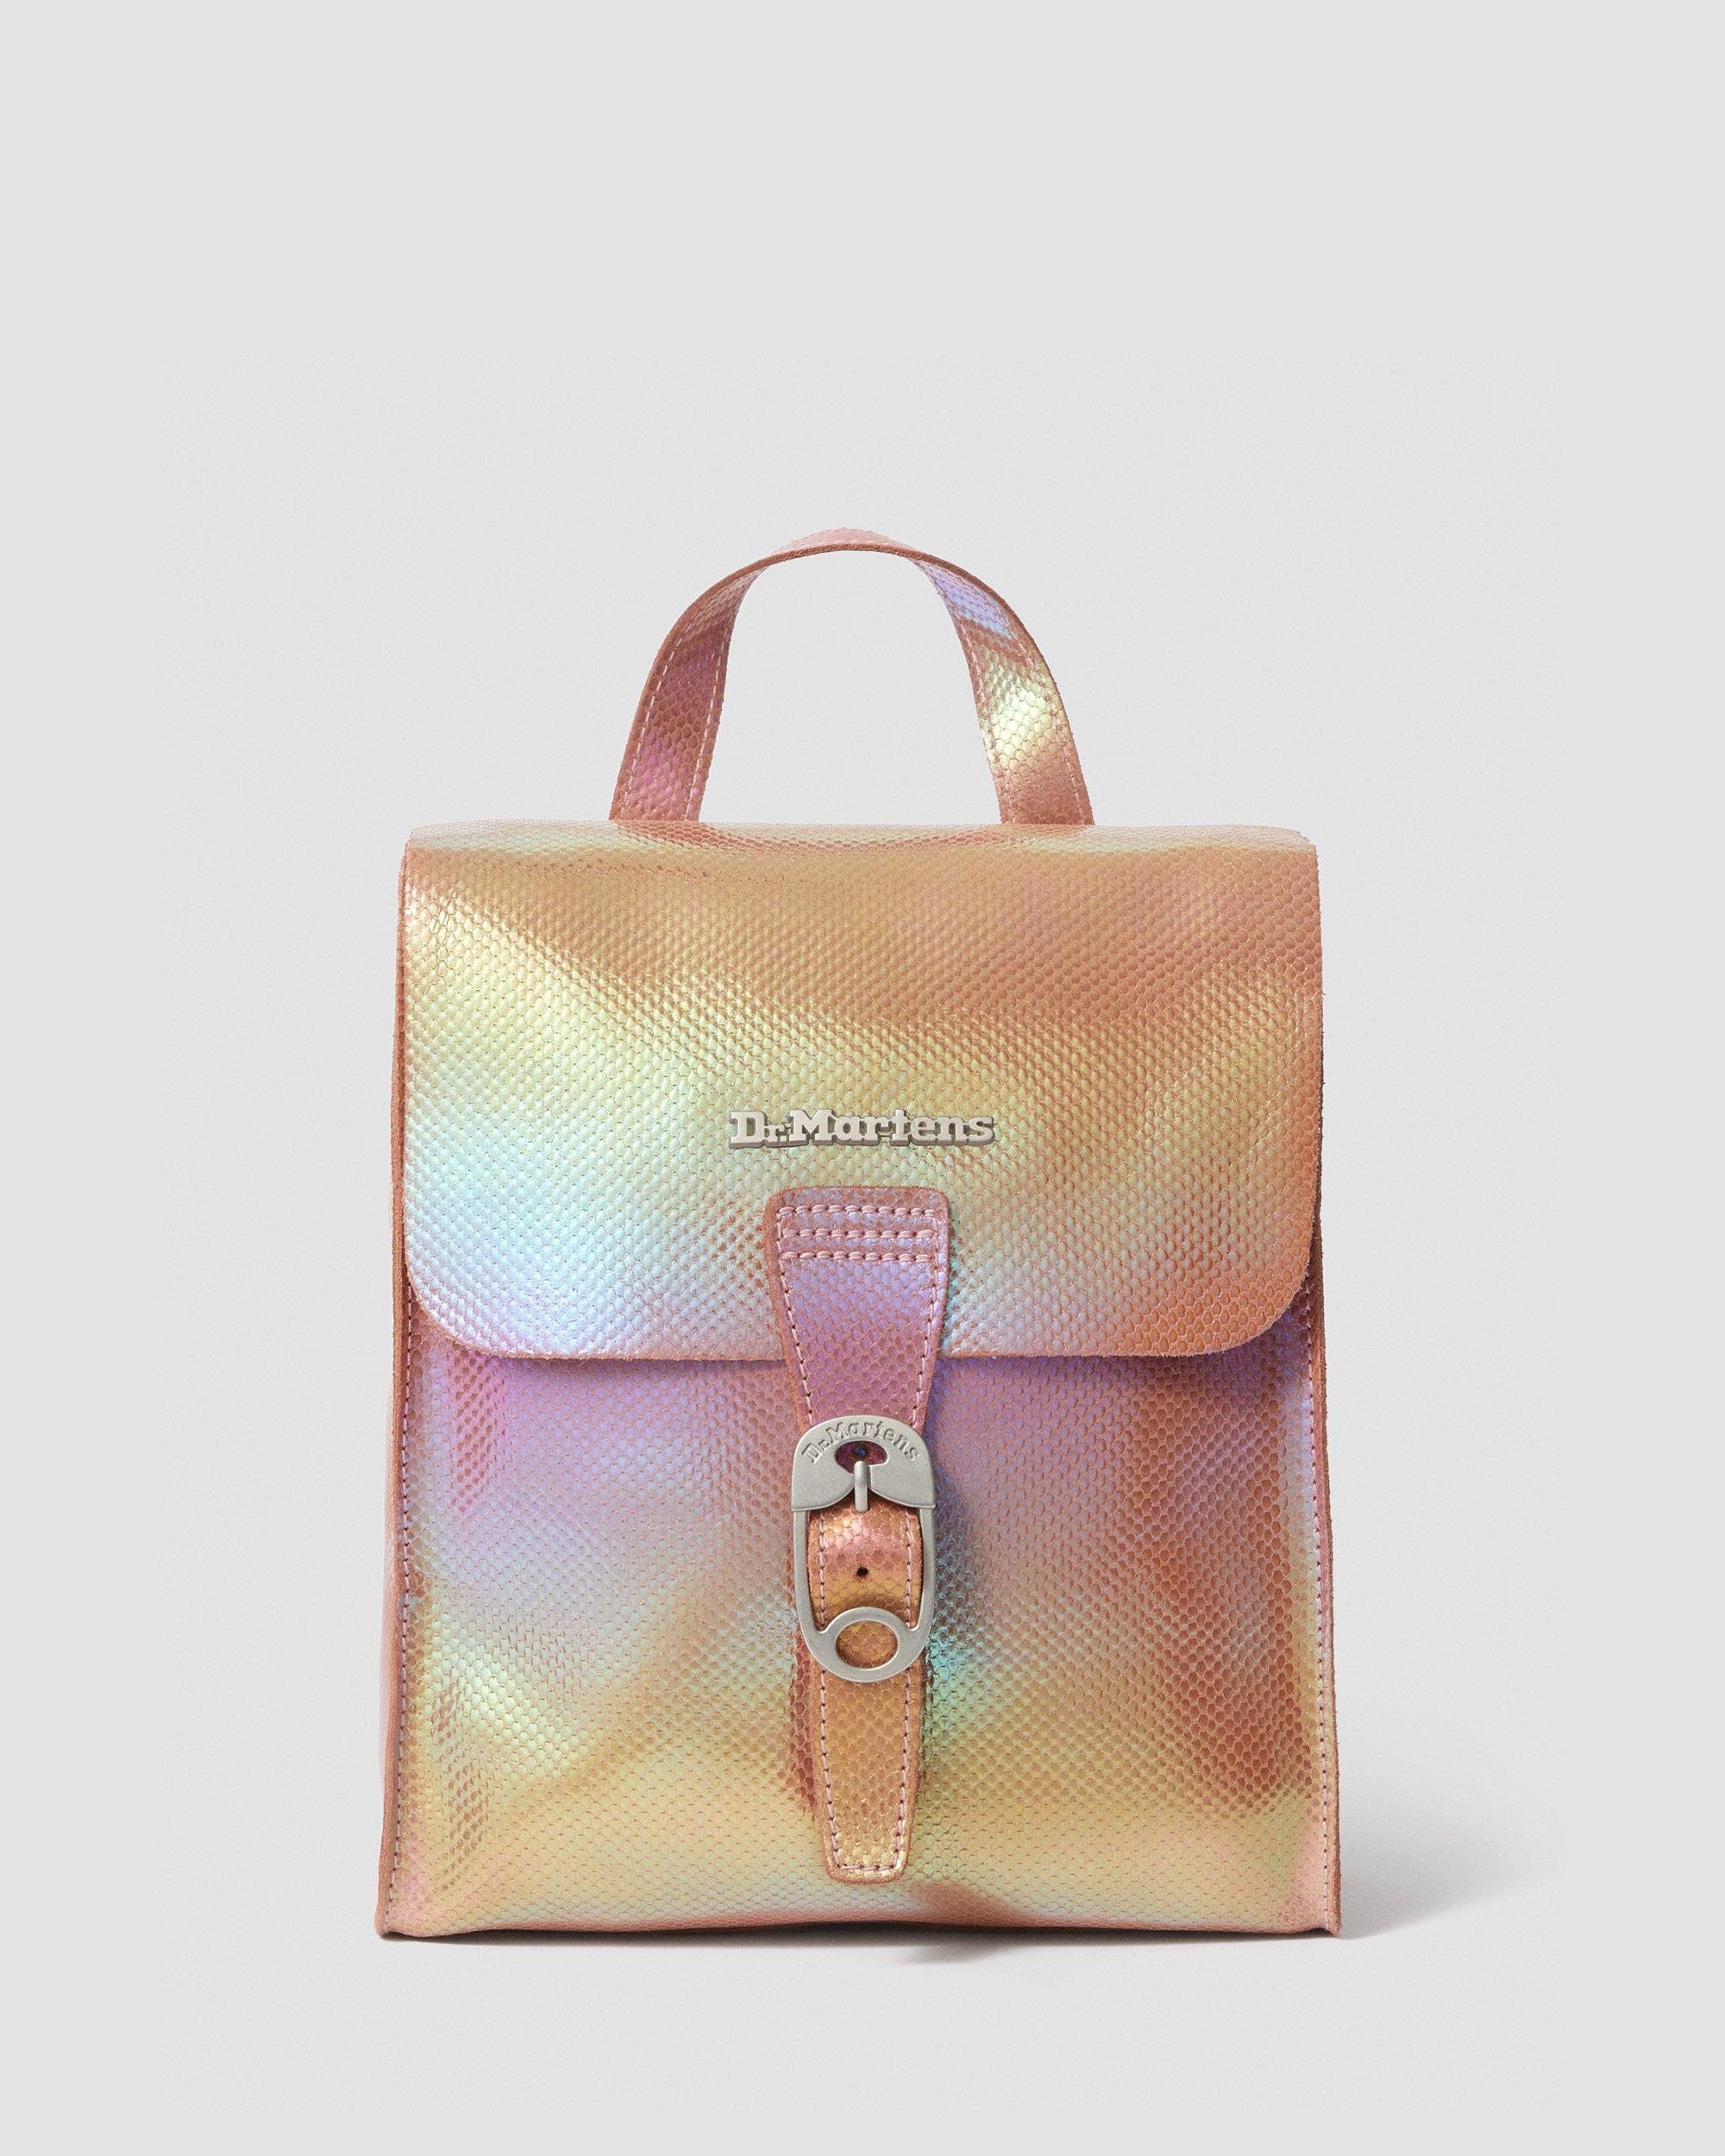 DR MARTENS Iridescent Leather Mini Backpack